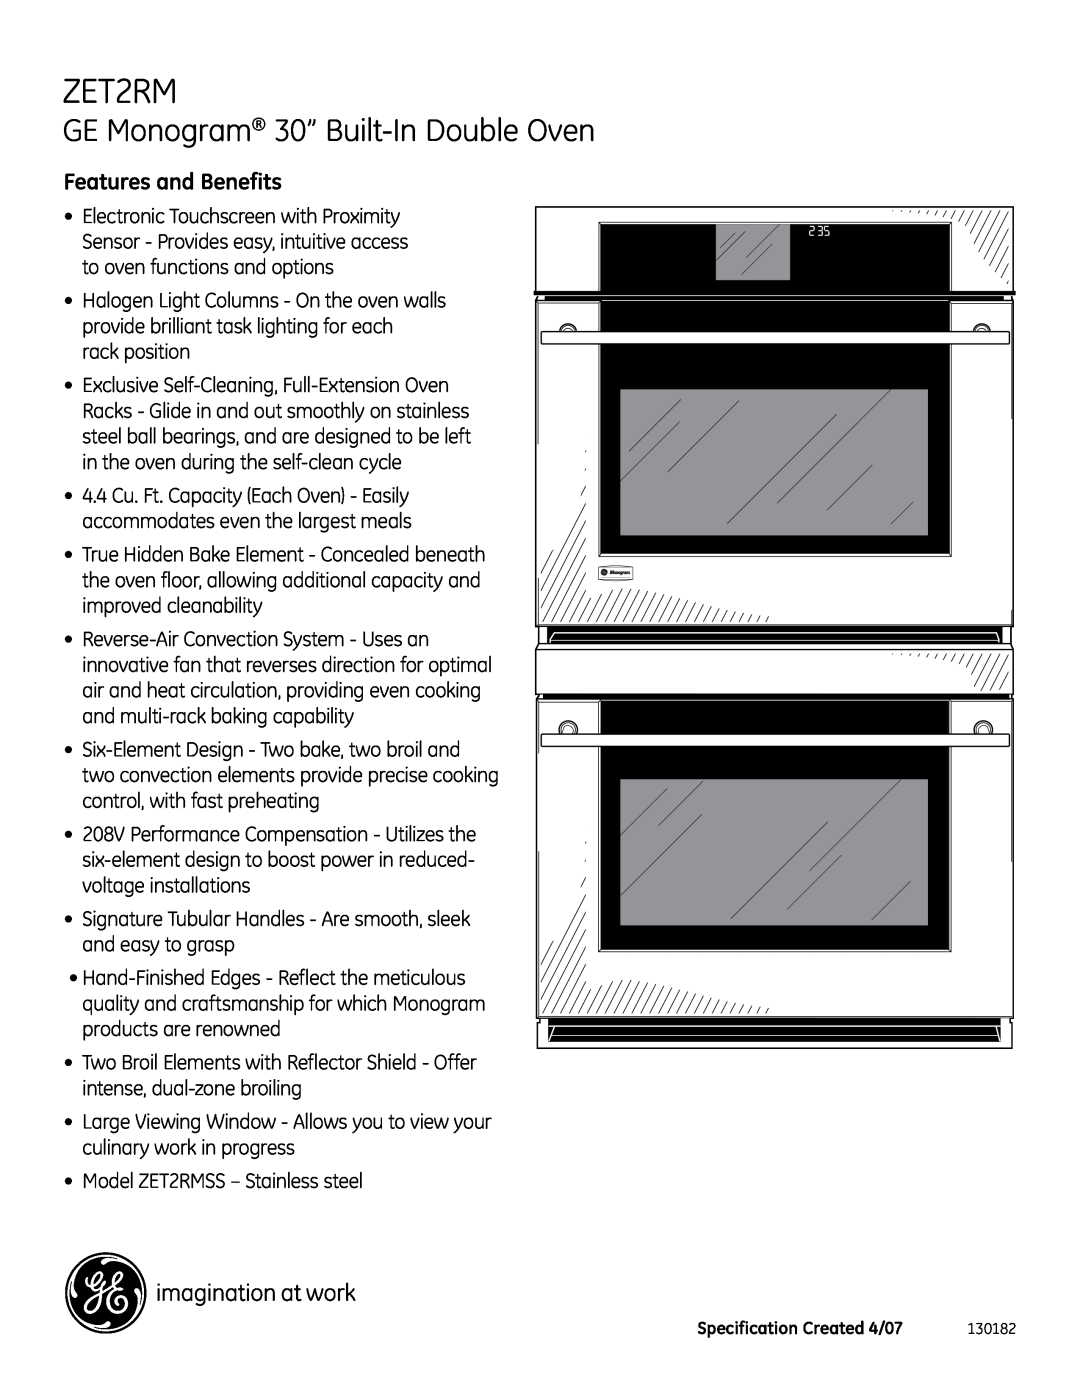 GE Monogram ZET2RM dimensions Features and Benefits, GE Monogram 30” Built-In Double Oven 